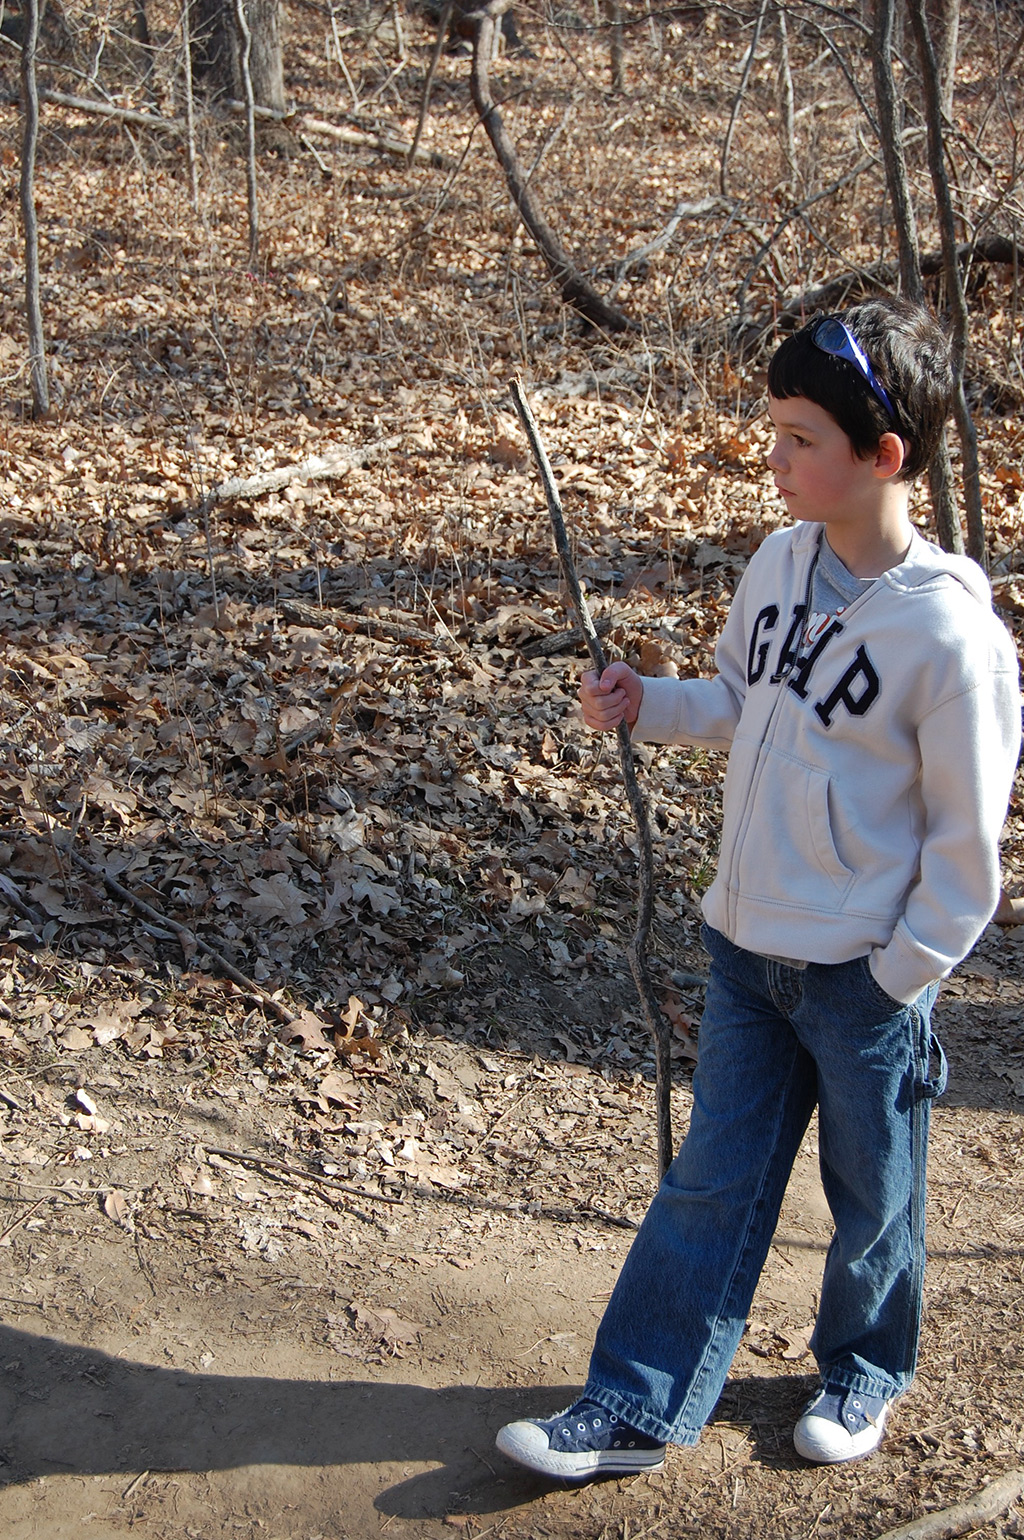 The author’s son, Jackson, on a hike in the Oklahoma Cross Timbers.